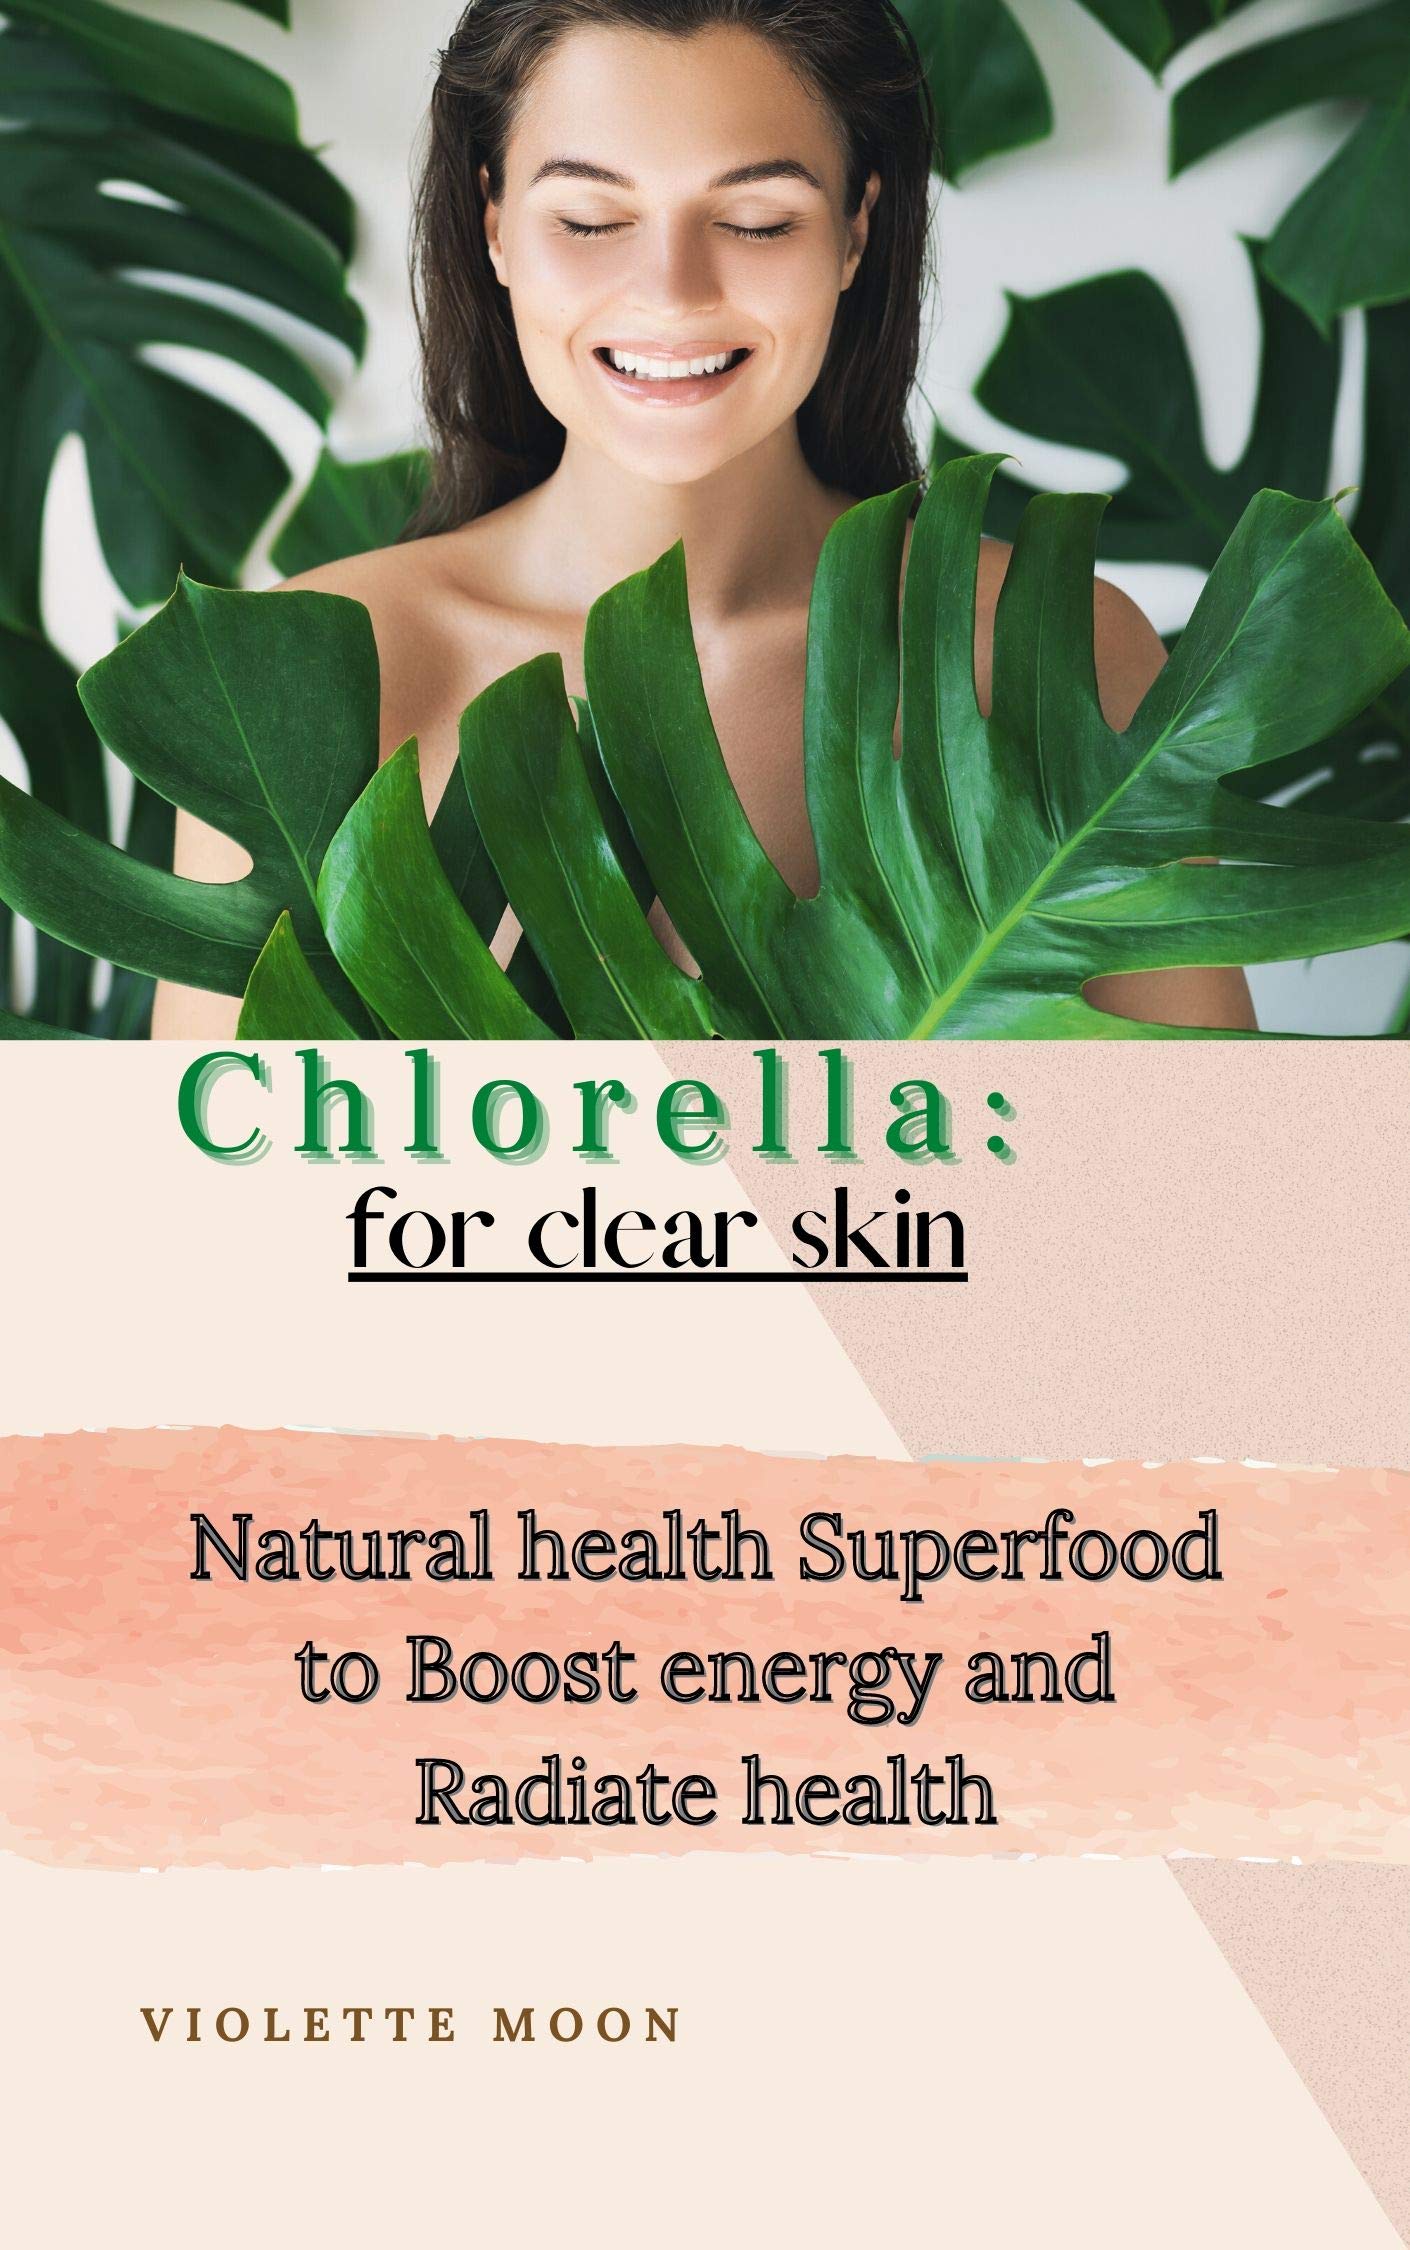 Chlorella for Clear Skin: Superfood Chlorella to detoxify your body and skin